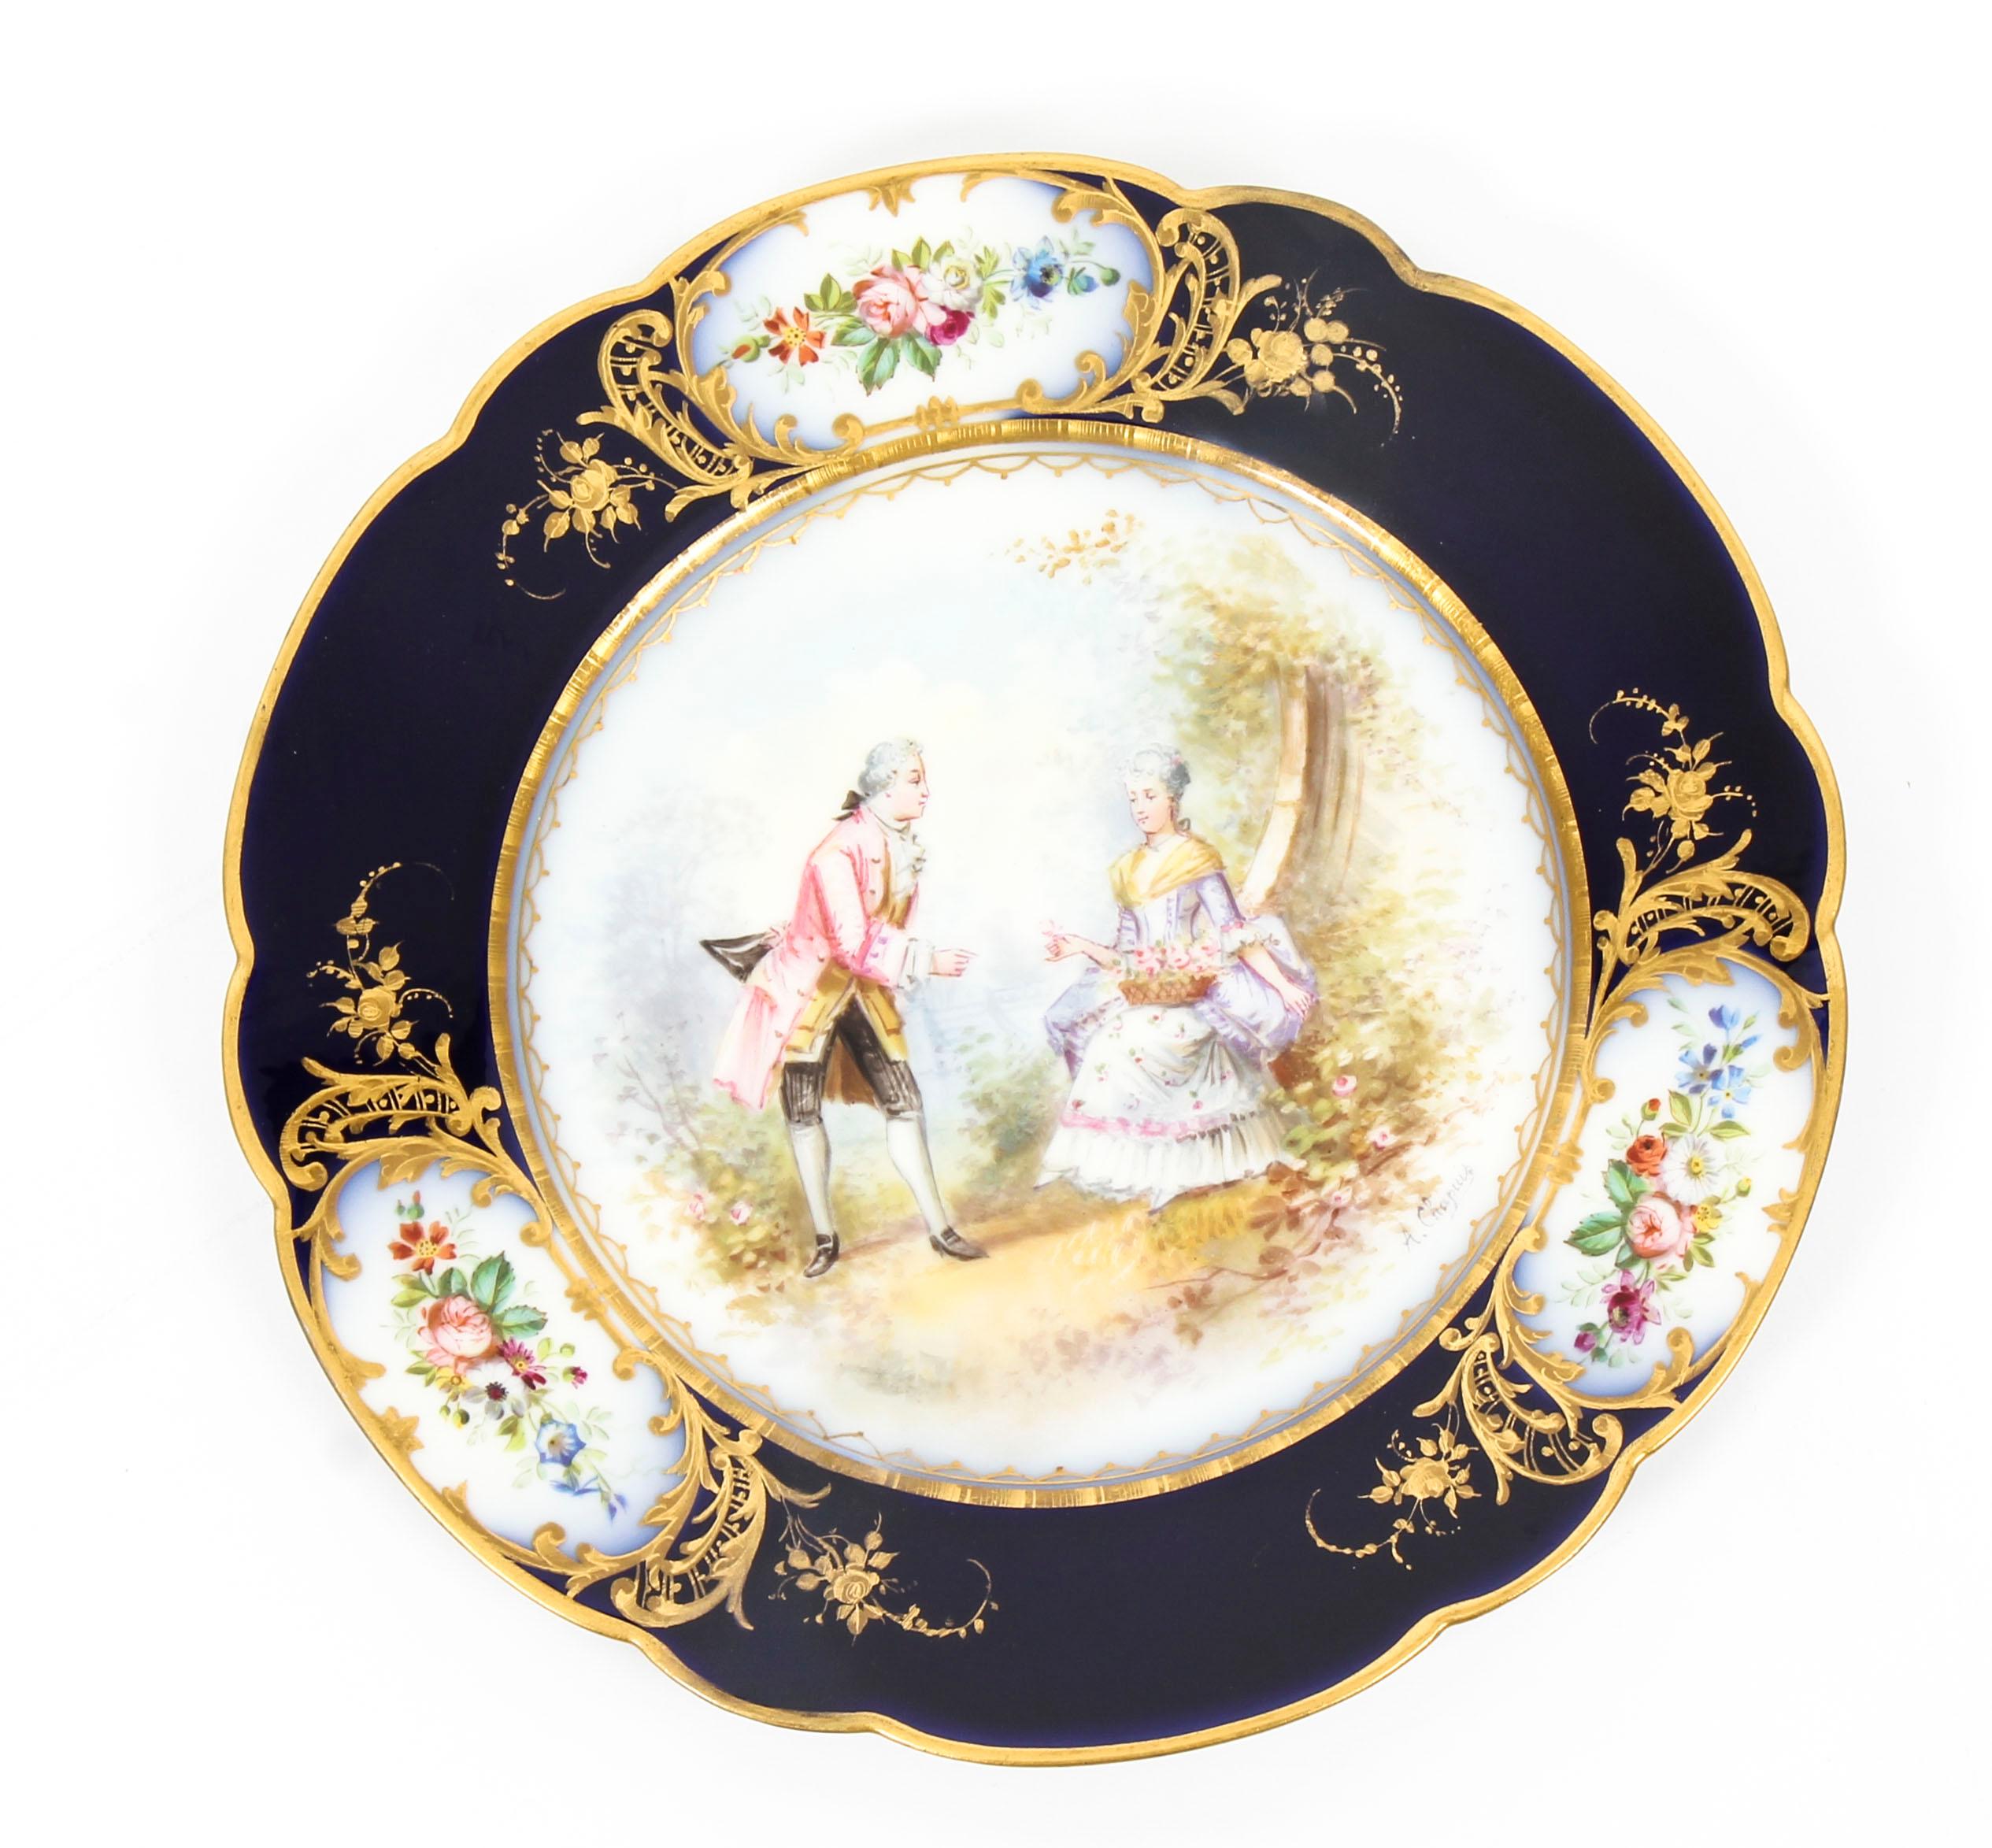 This is a beautiful antique set of twelve French Sevres porcelain cabinet plates, each bears the blue interlaced L's for Sevres, enclosing the date letter BB for 1779 and the painters mark for Chapuis le Jeune

Each superbly hand painted plate